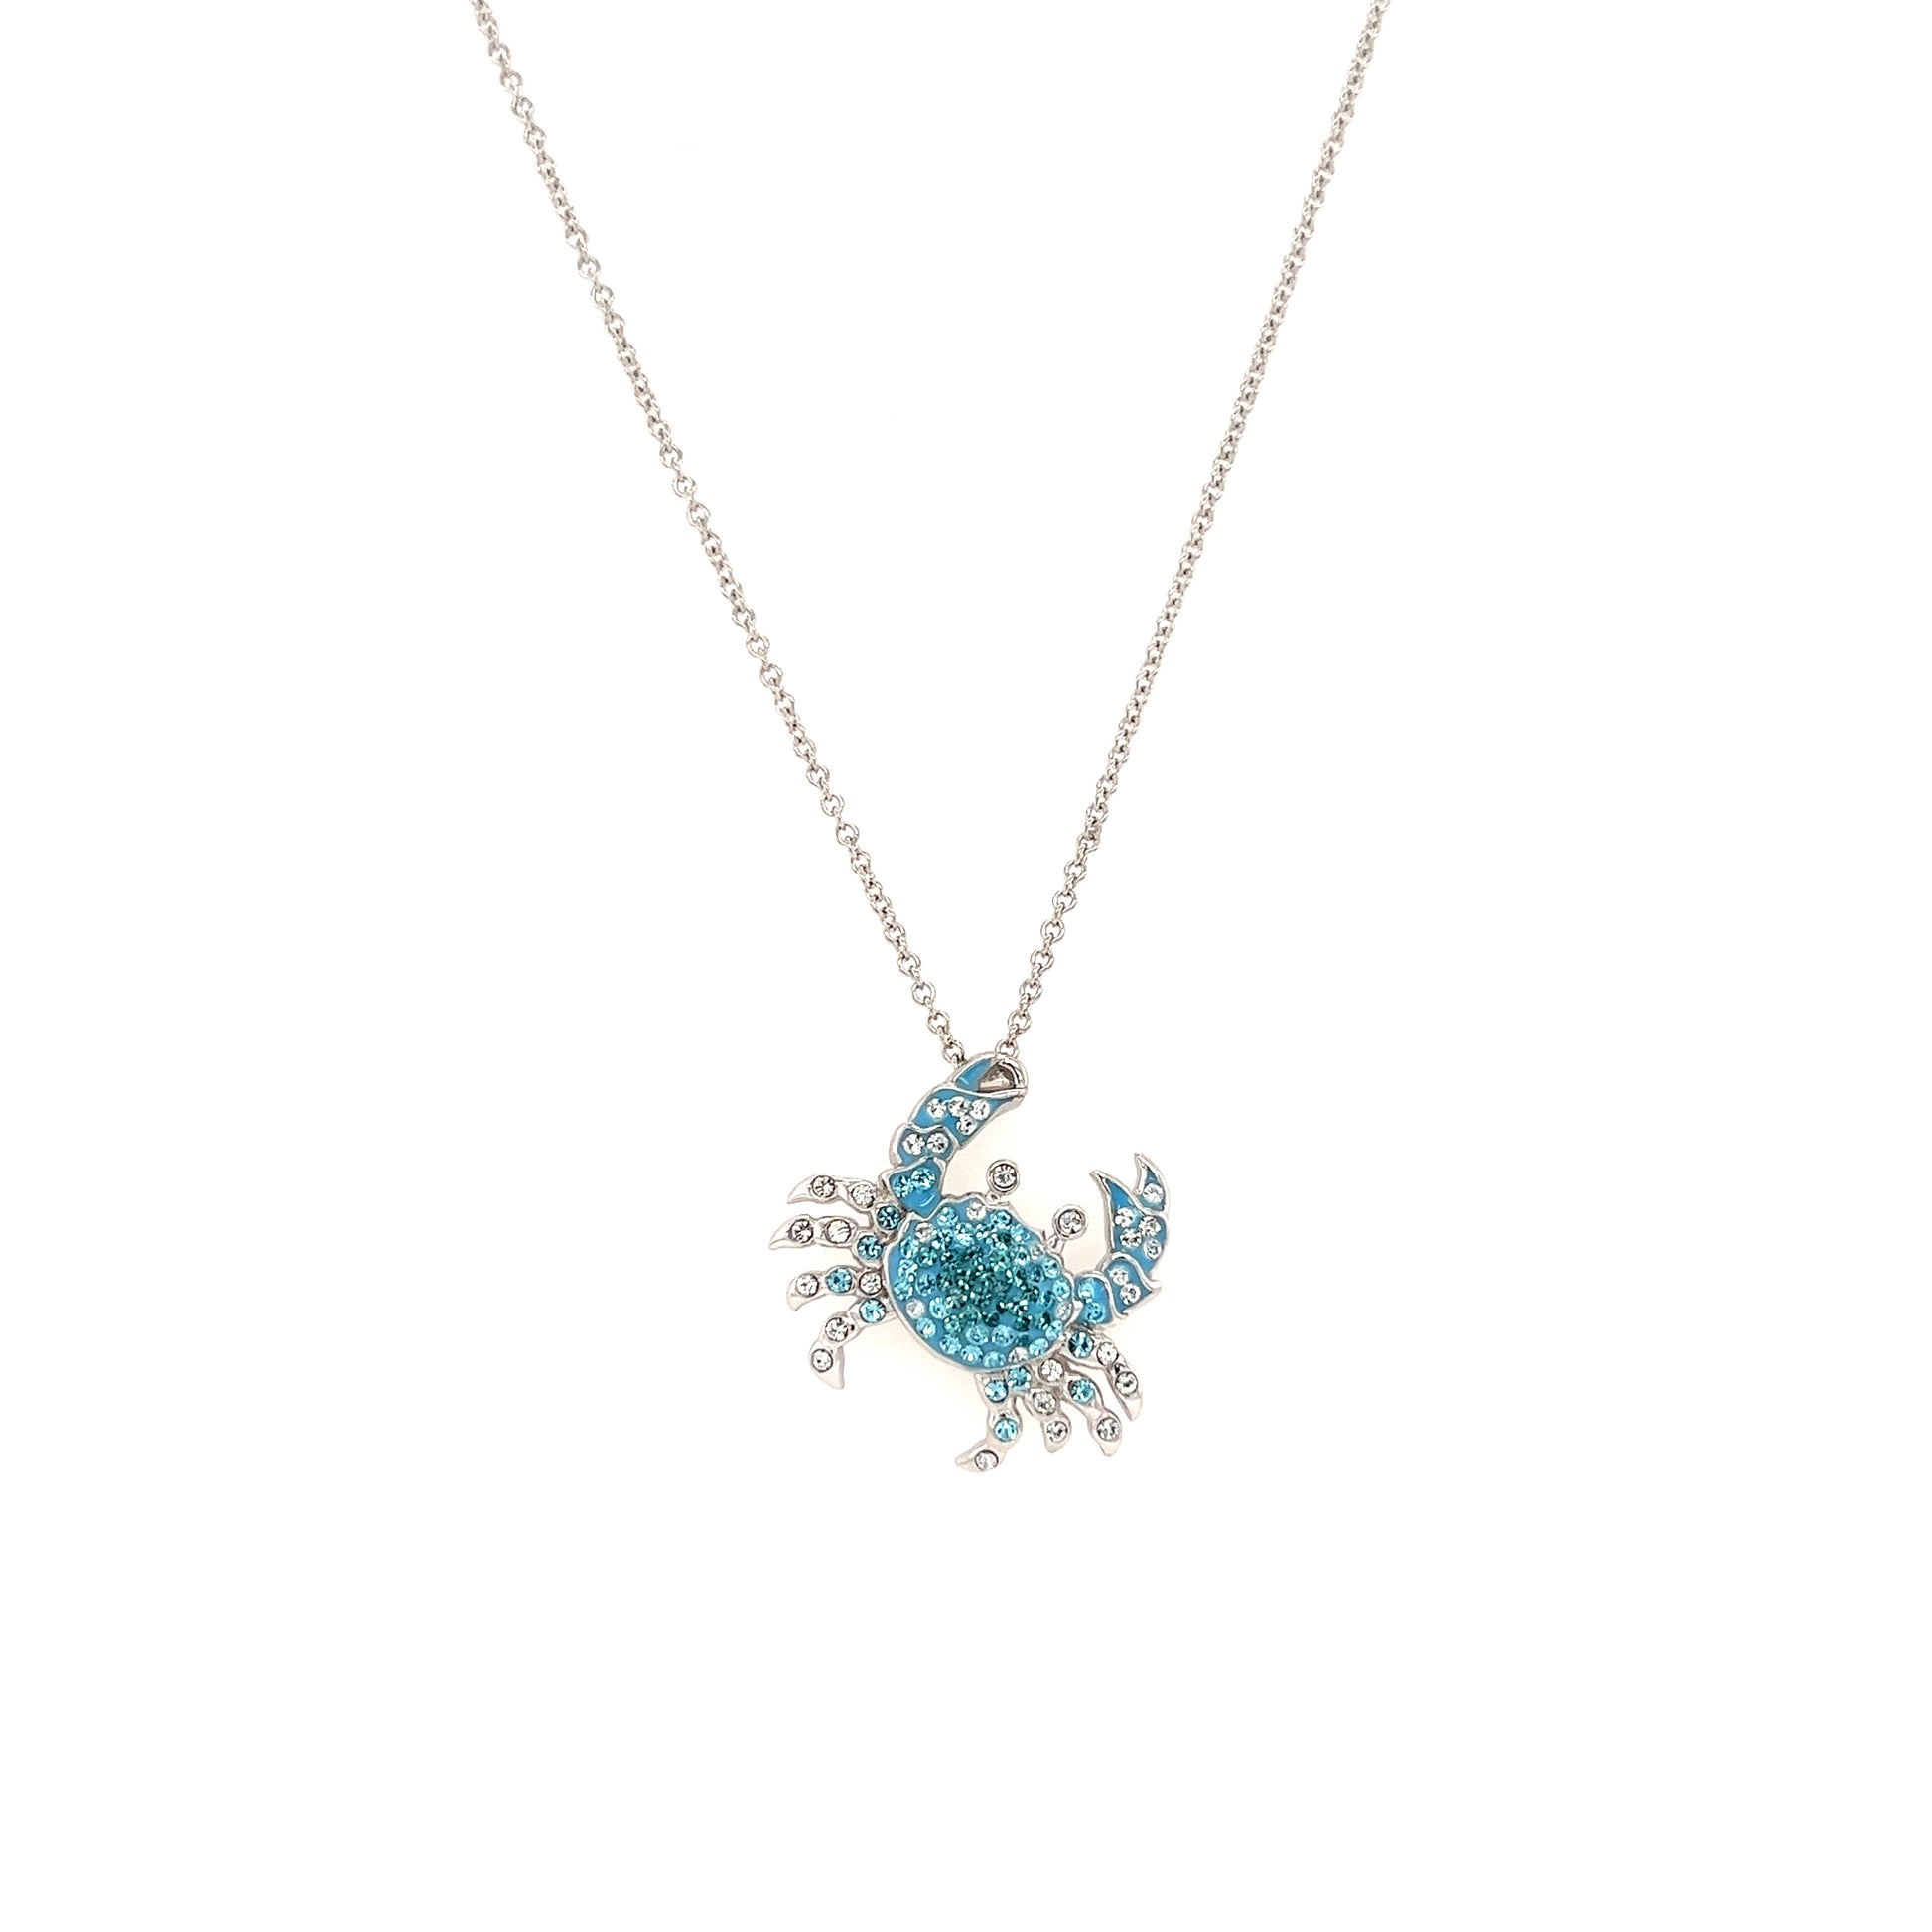 Blue Crab Necklace with Aqua and White Crystals in Sterling Silver Front View